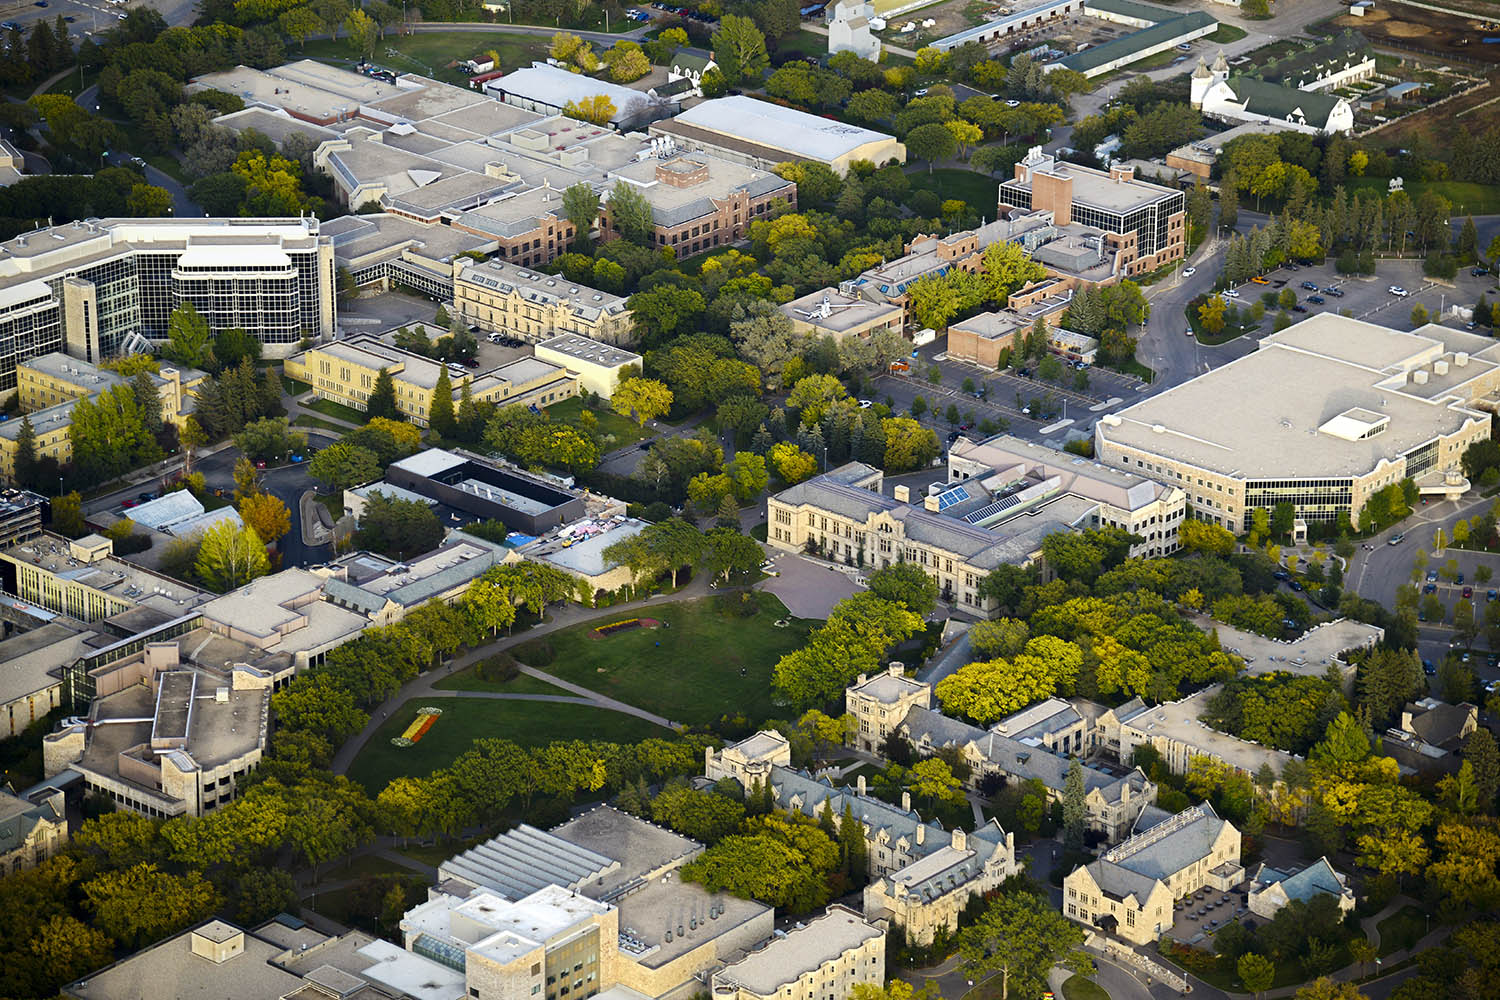 An aerial view of the University of Saskatchewan campus in Saskatoon. (Photo: University of Saskatchewan)